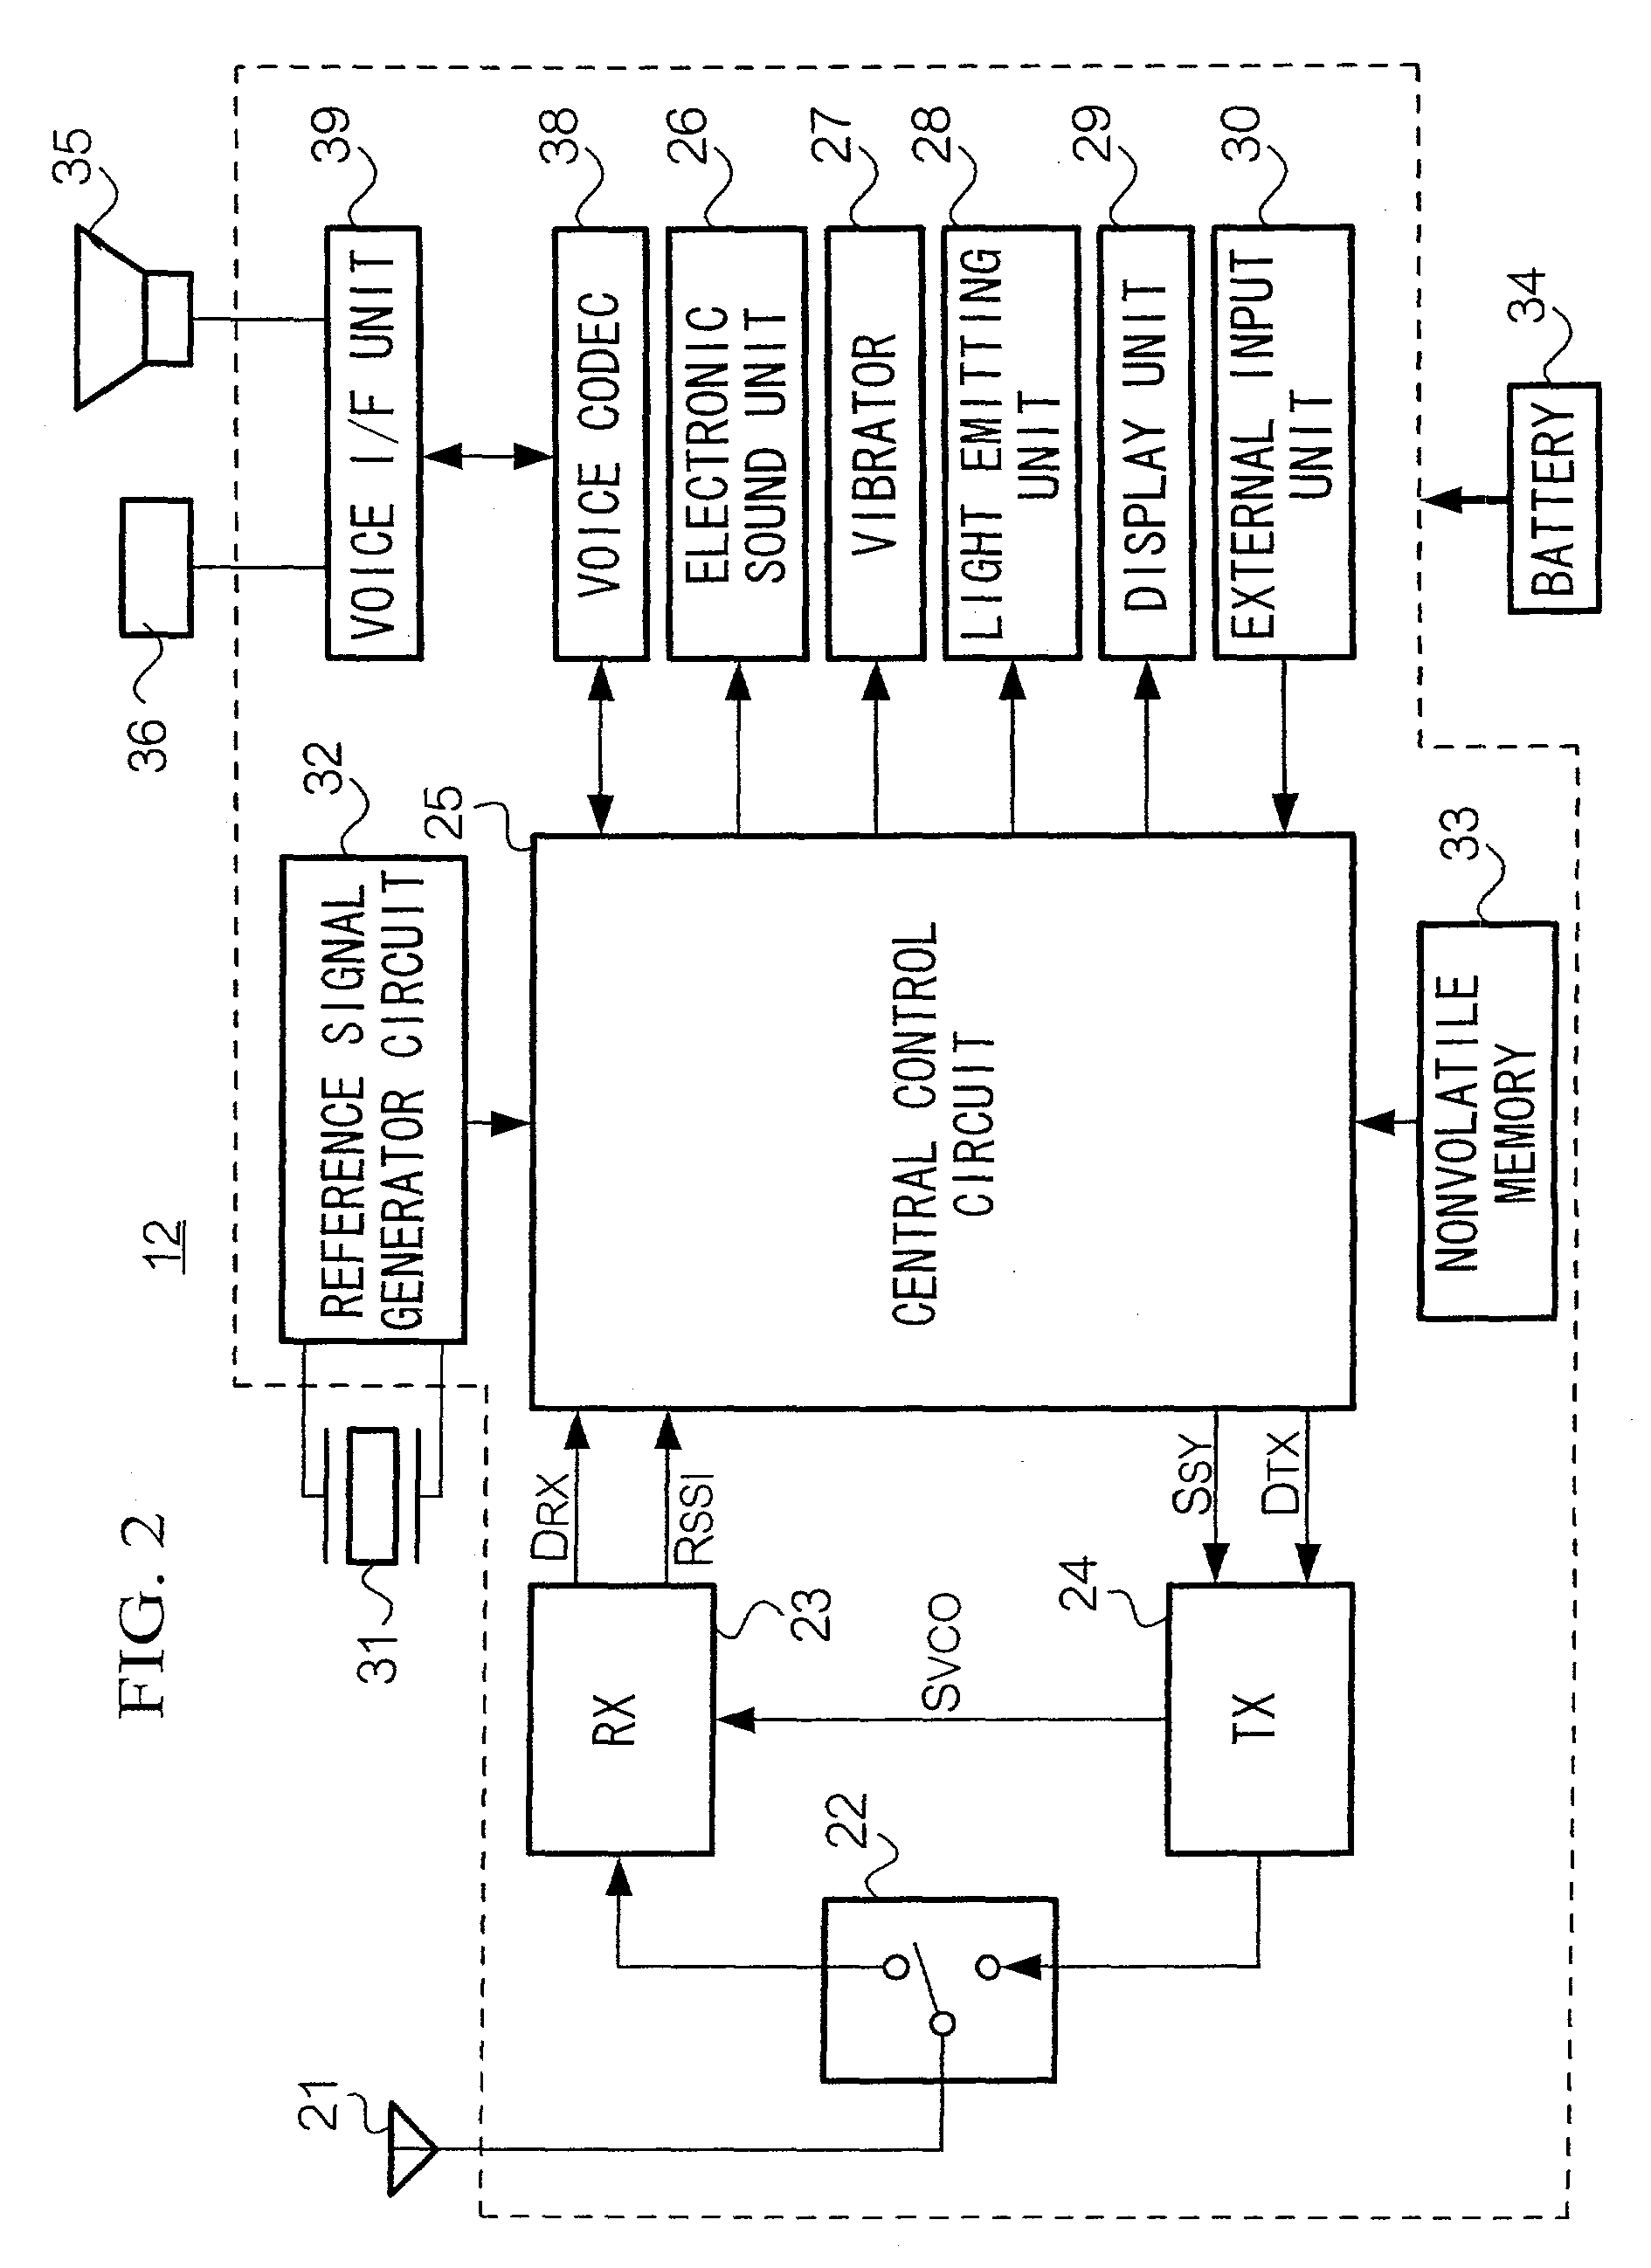 Mobile telephone and radio communication device cooperatively processing incoming call